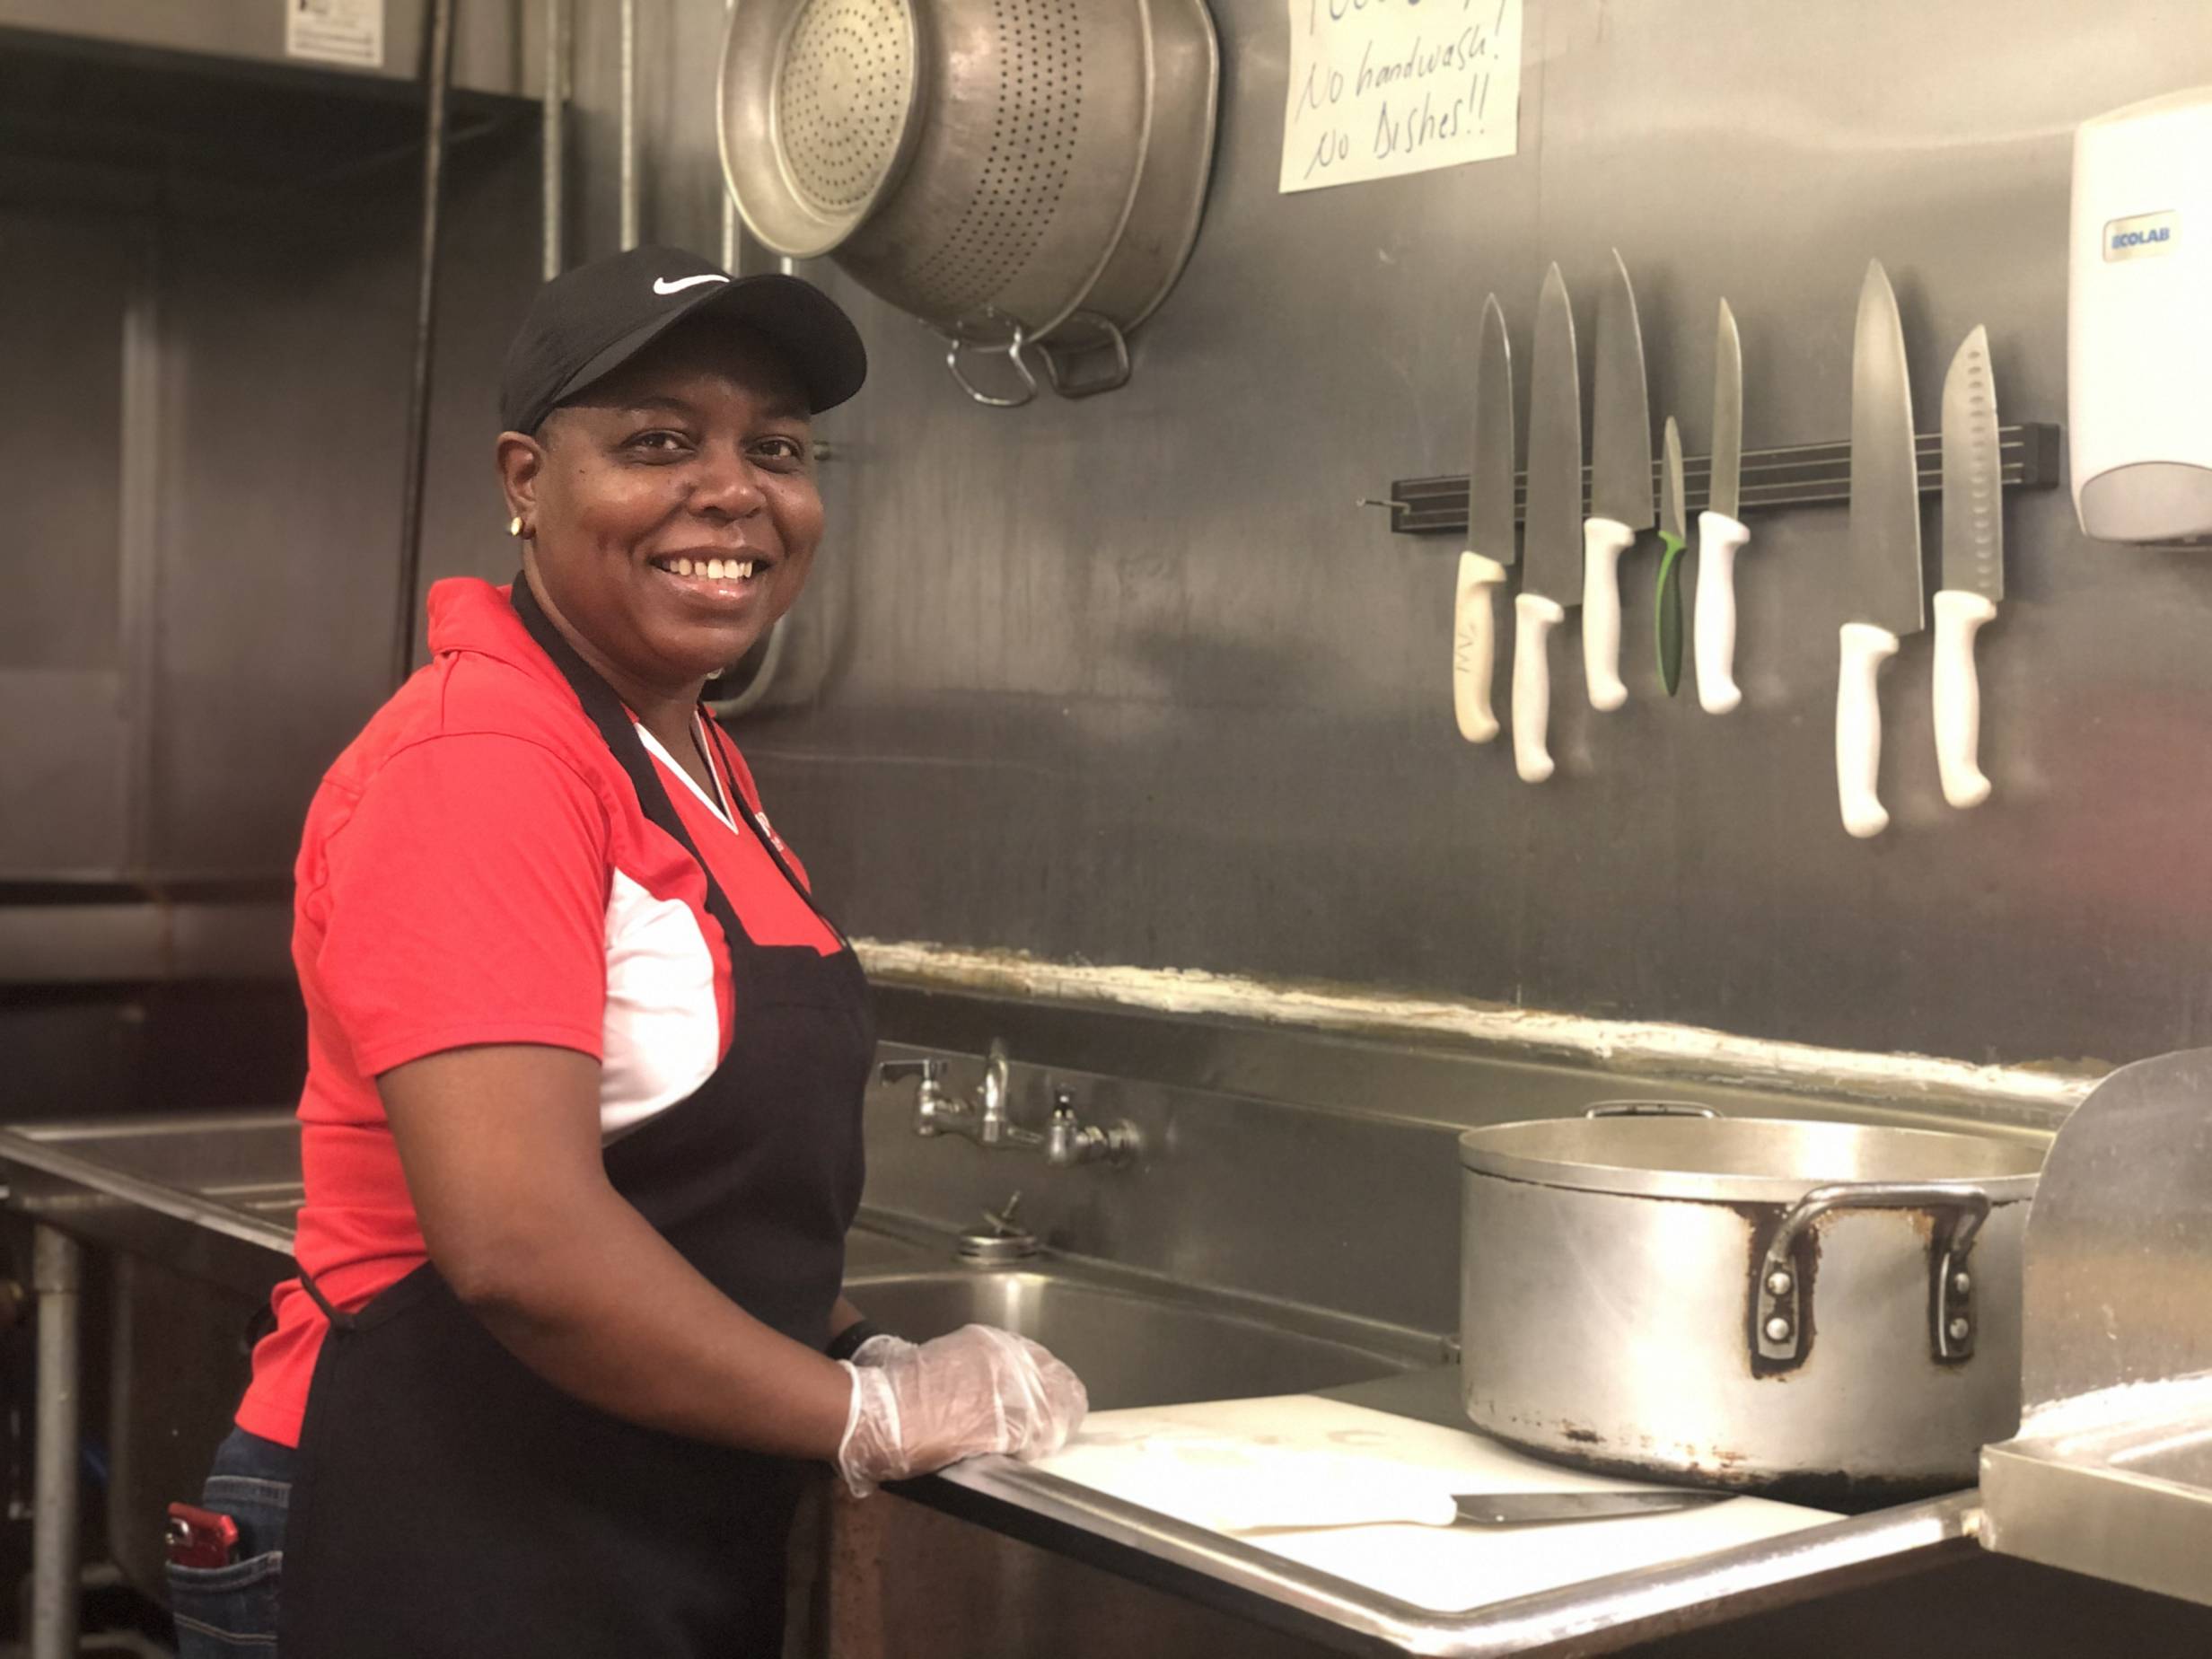 In the kitchen with Mubanga Chanda, co-owner and chef at Stango Cuisine